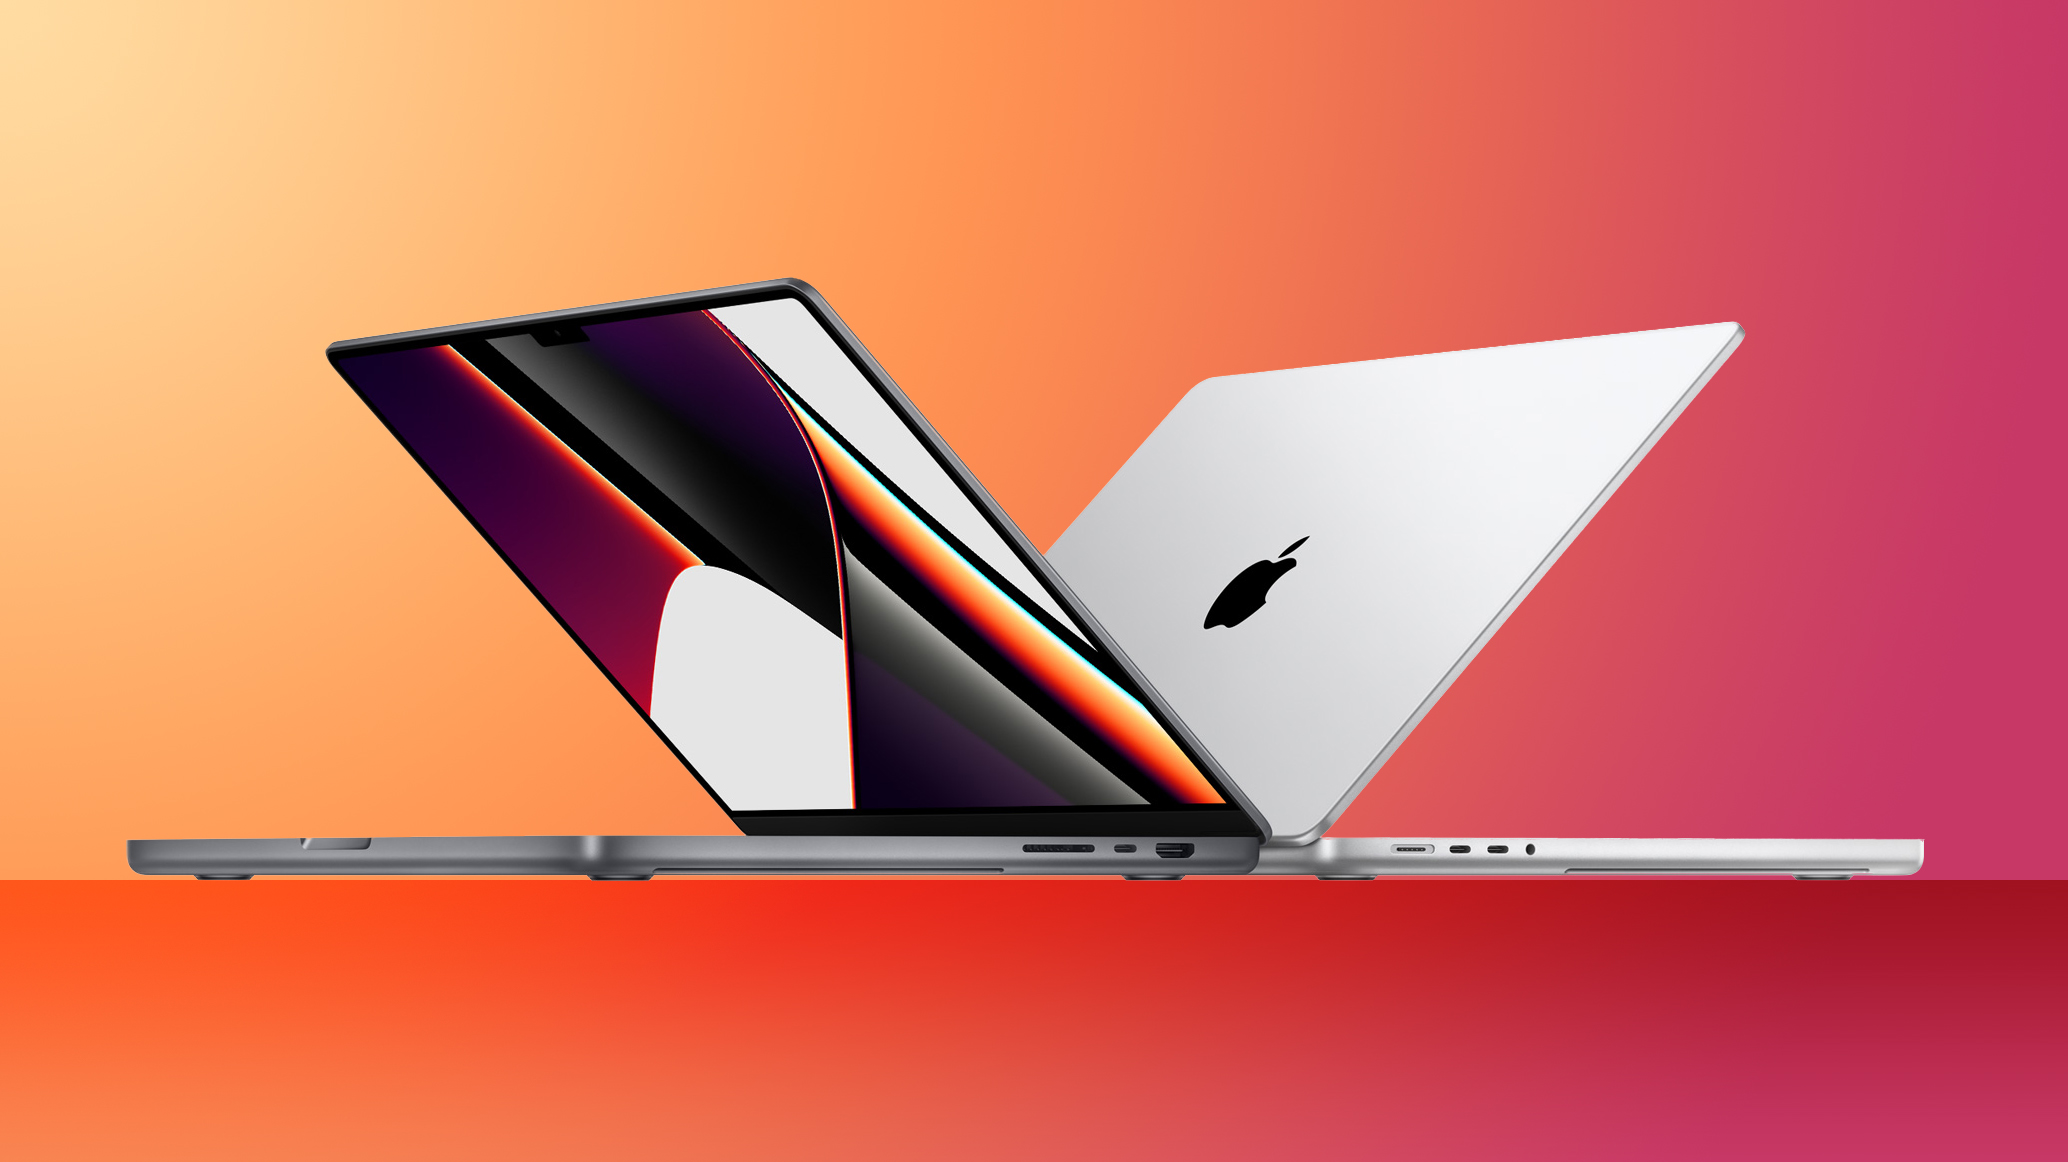 New MacBook Pro Models Max Out With 96GB of RAM, Up From 64GB